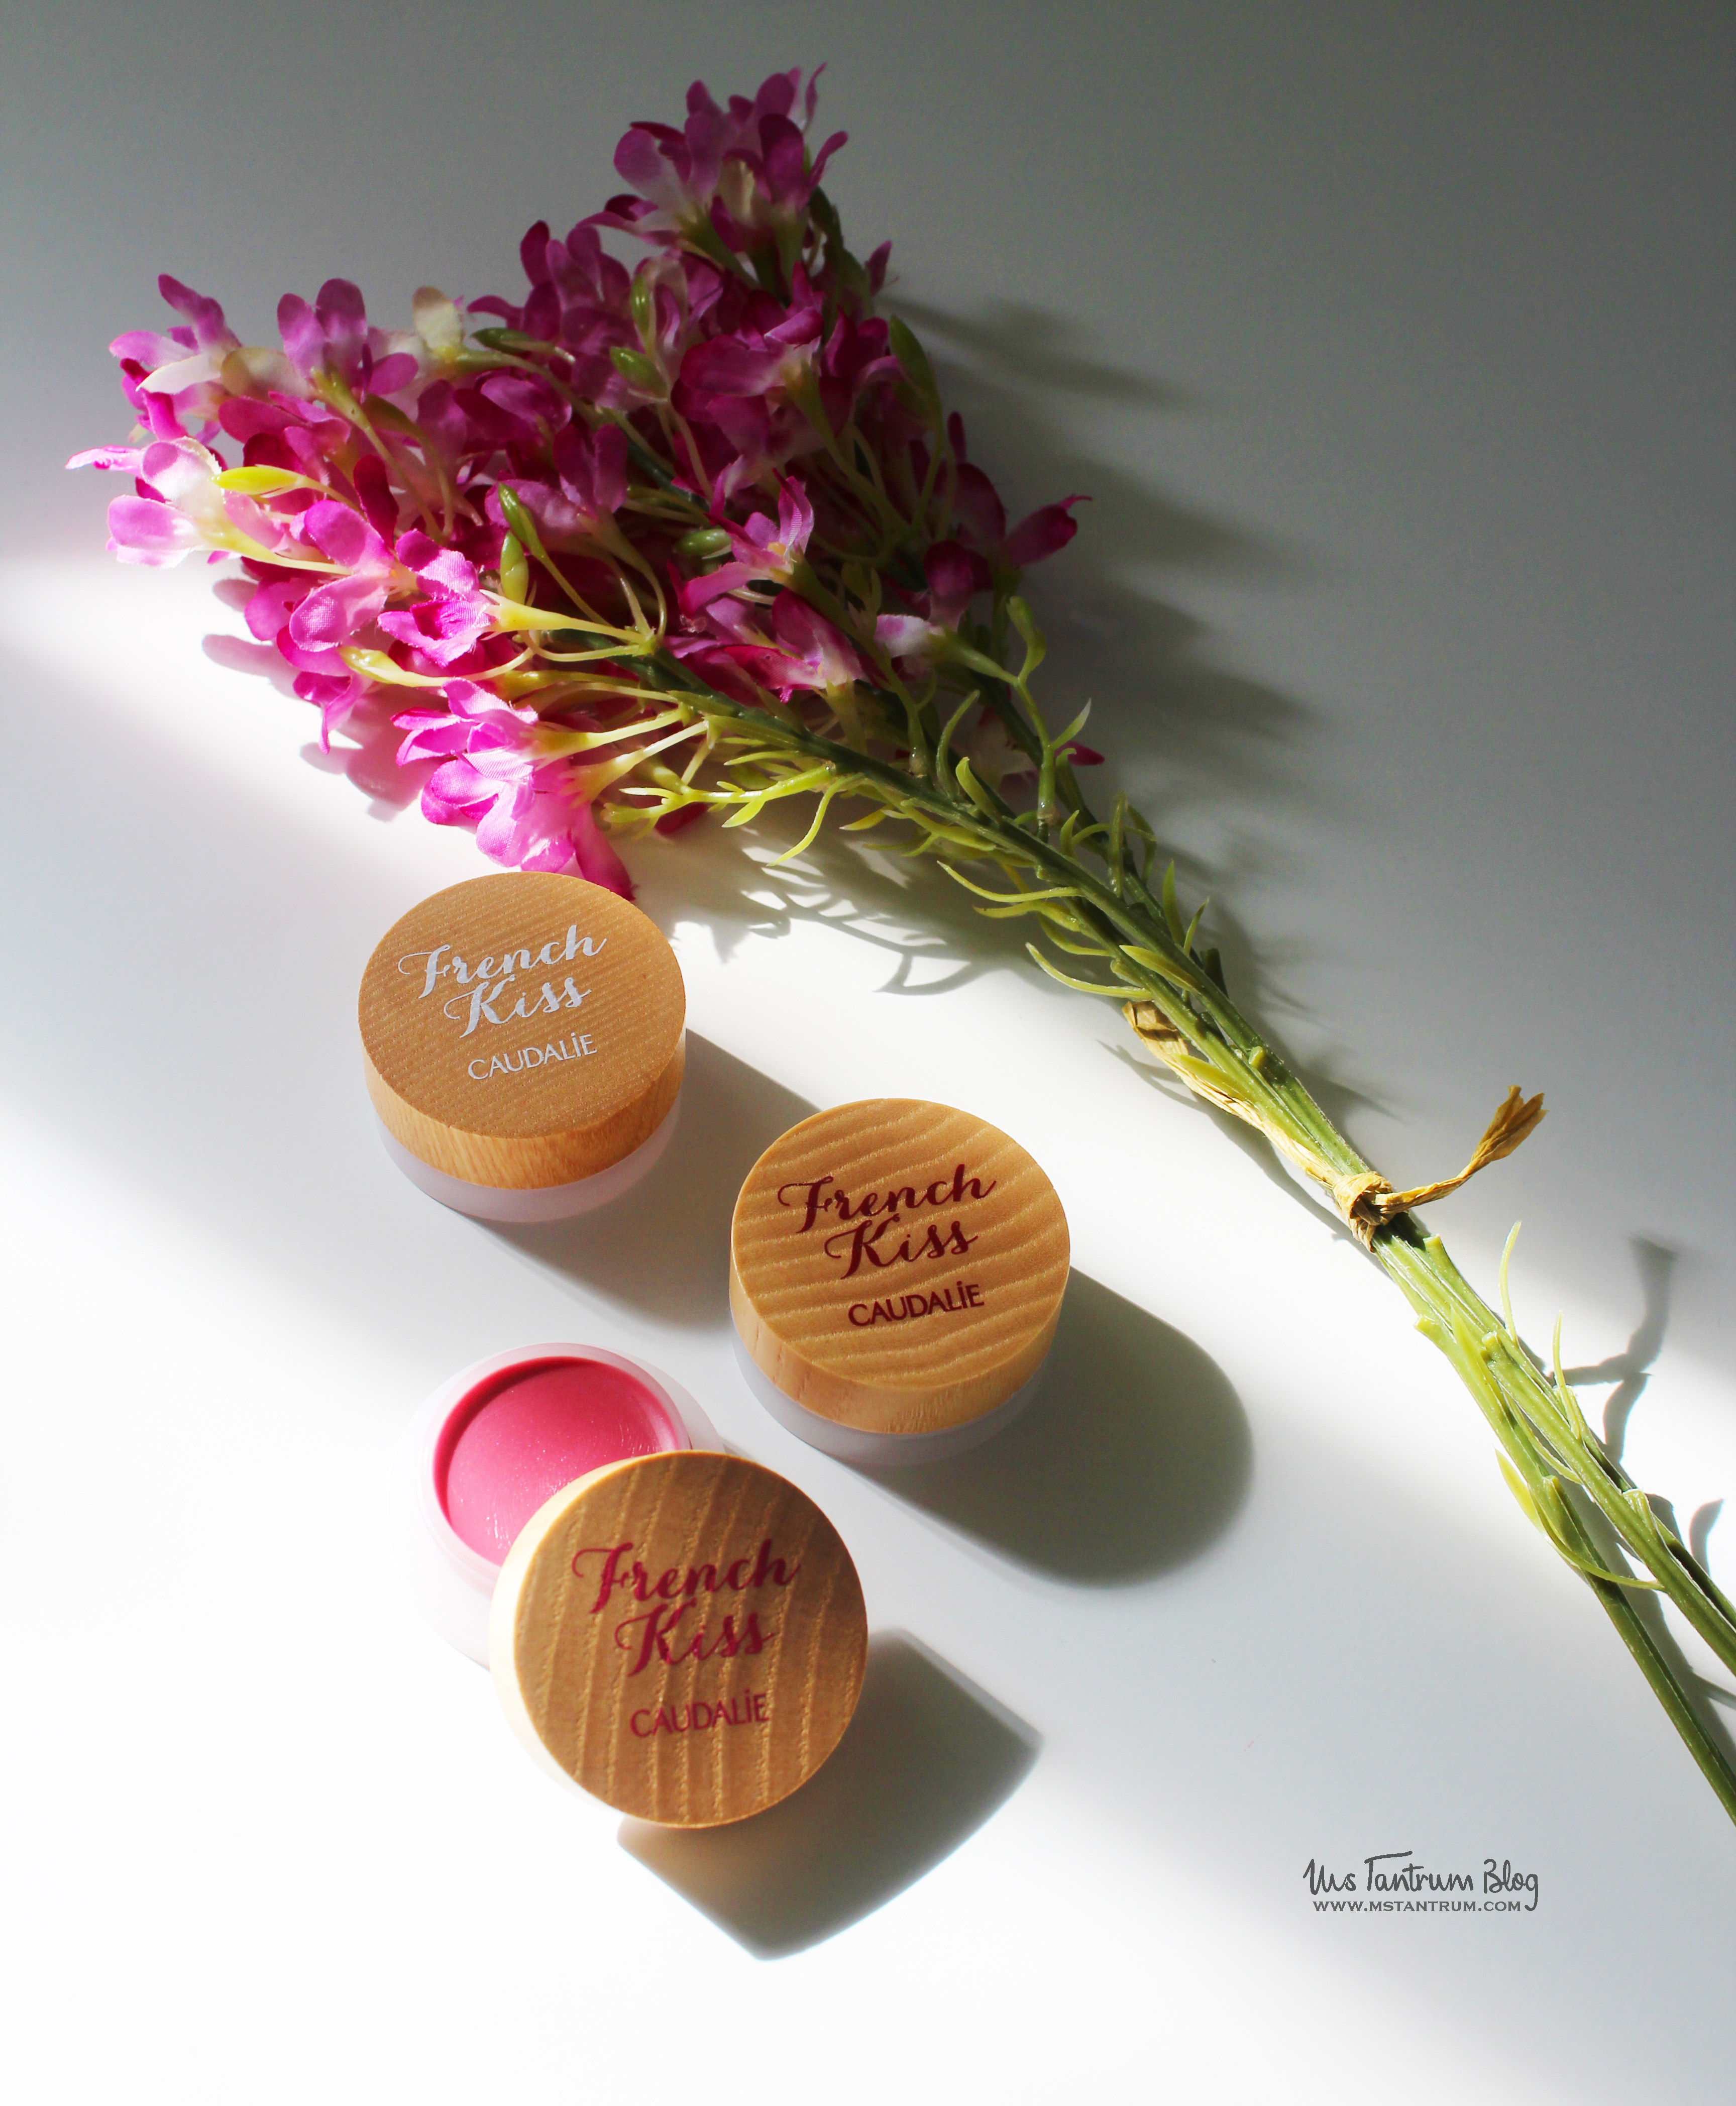 Caudalie French Kiss - Tinted lip balm review